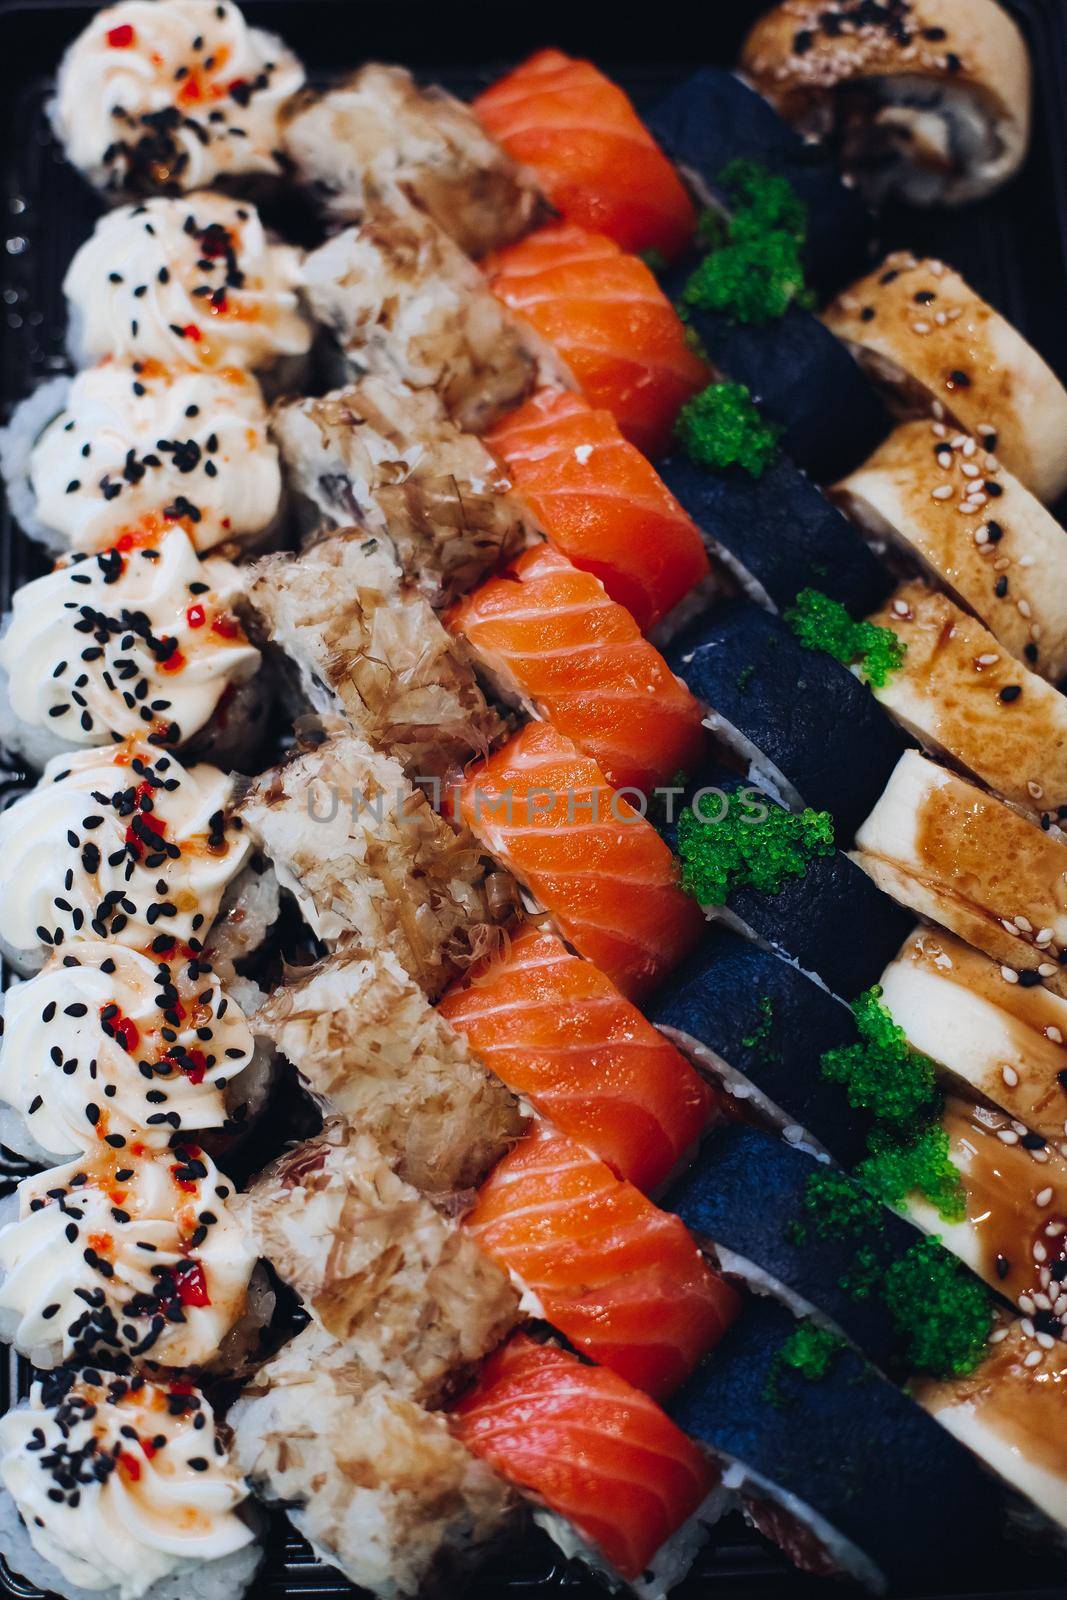 Colorful delicious mouthwatering sushi set laying on the plate including different ingredients: fish, caviar, rice, cucumber, salmon, soy sauce, wasabi, sesame seeds. An interesting presentation.